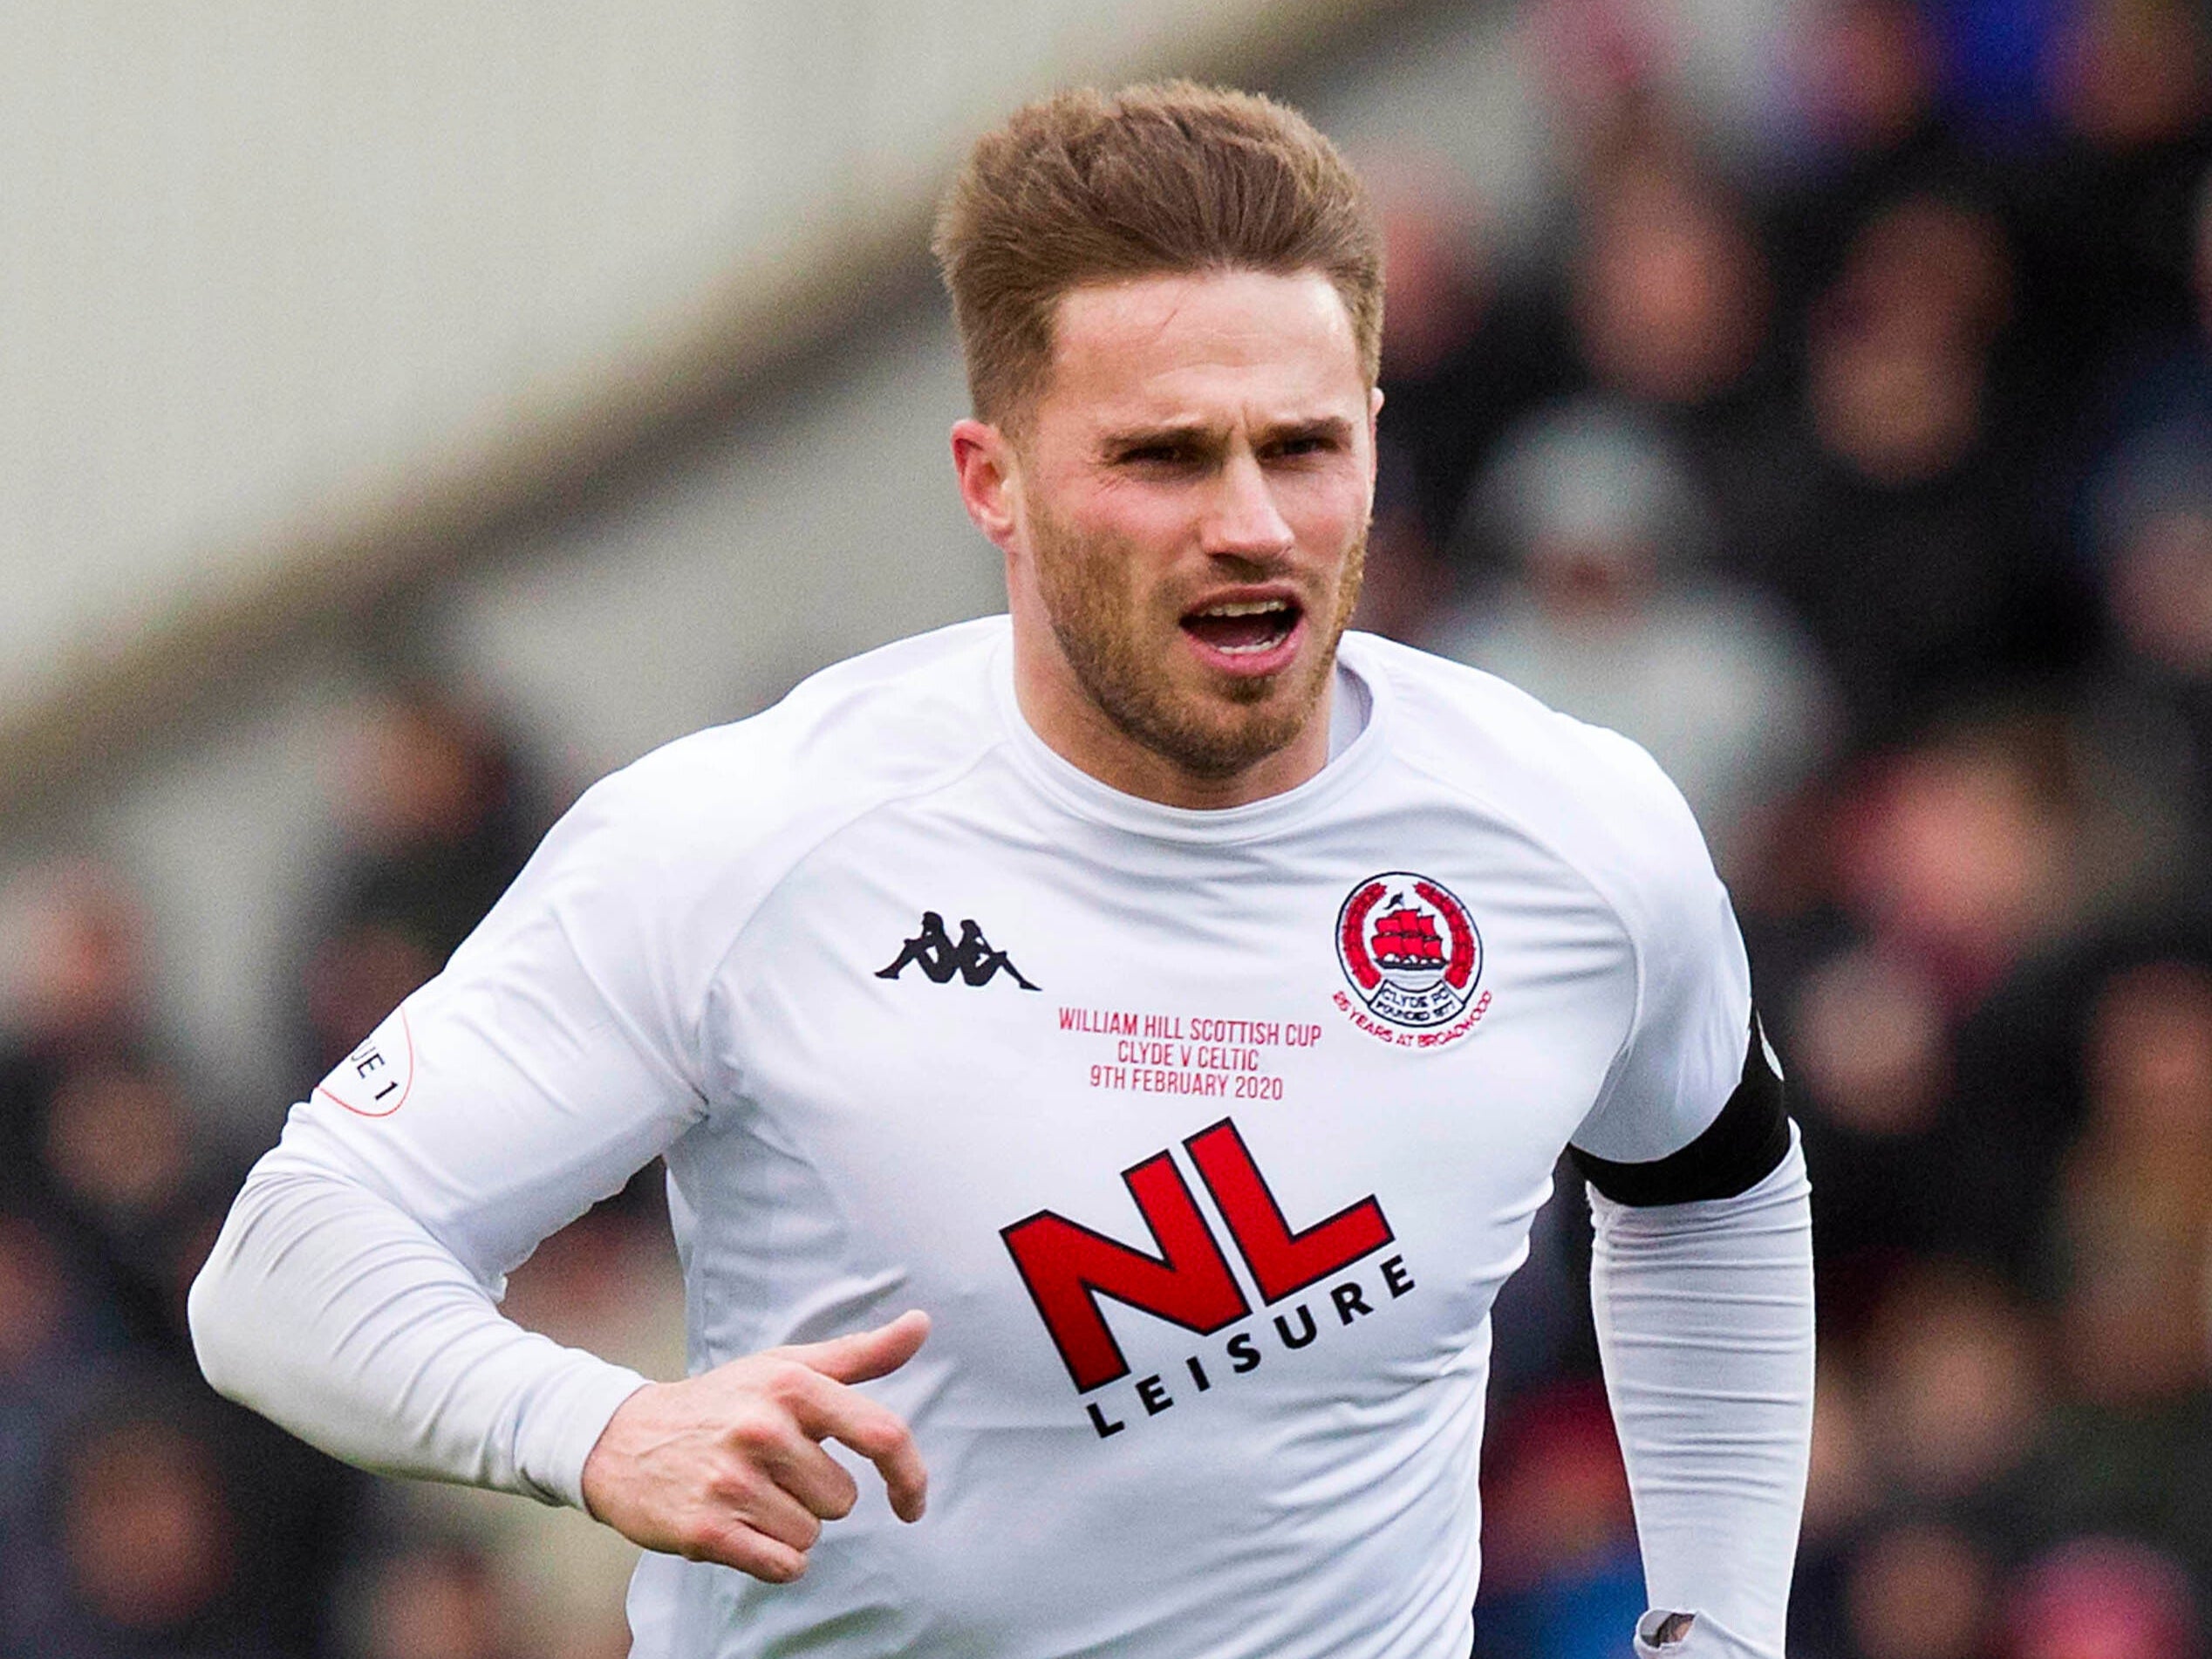 David Goodwillie had returned to Clyde on loan until the end of the season but the club have terminated that agreement